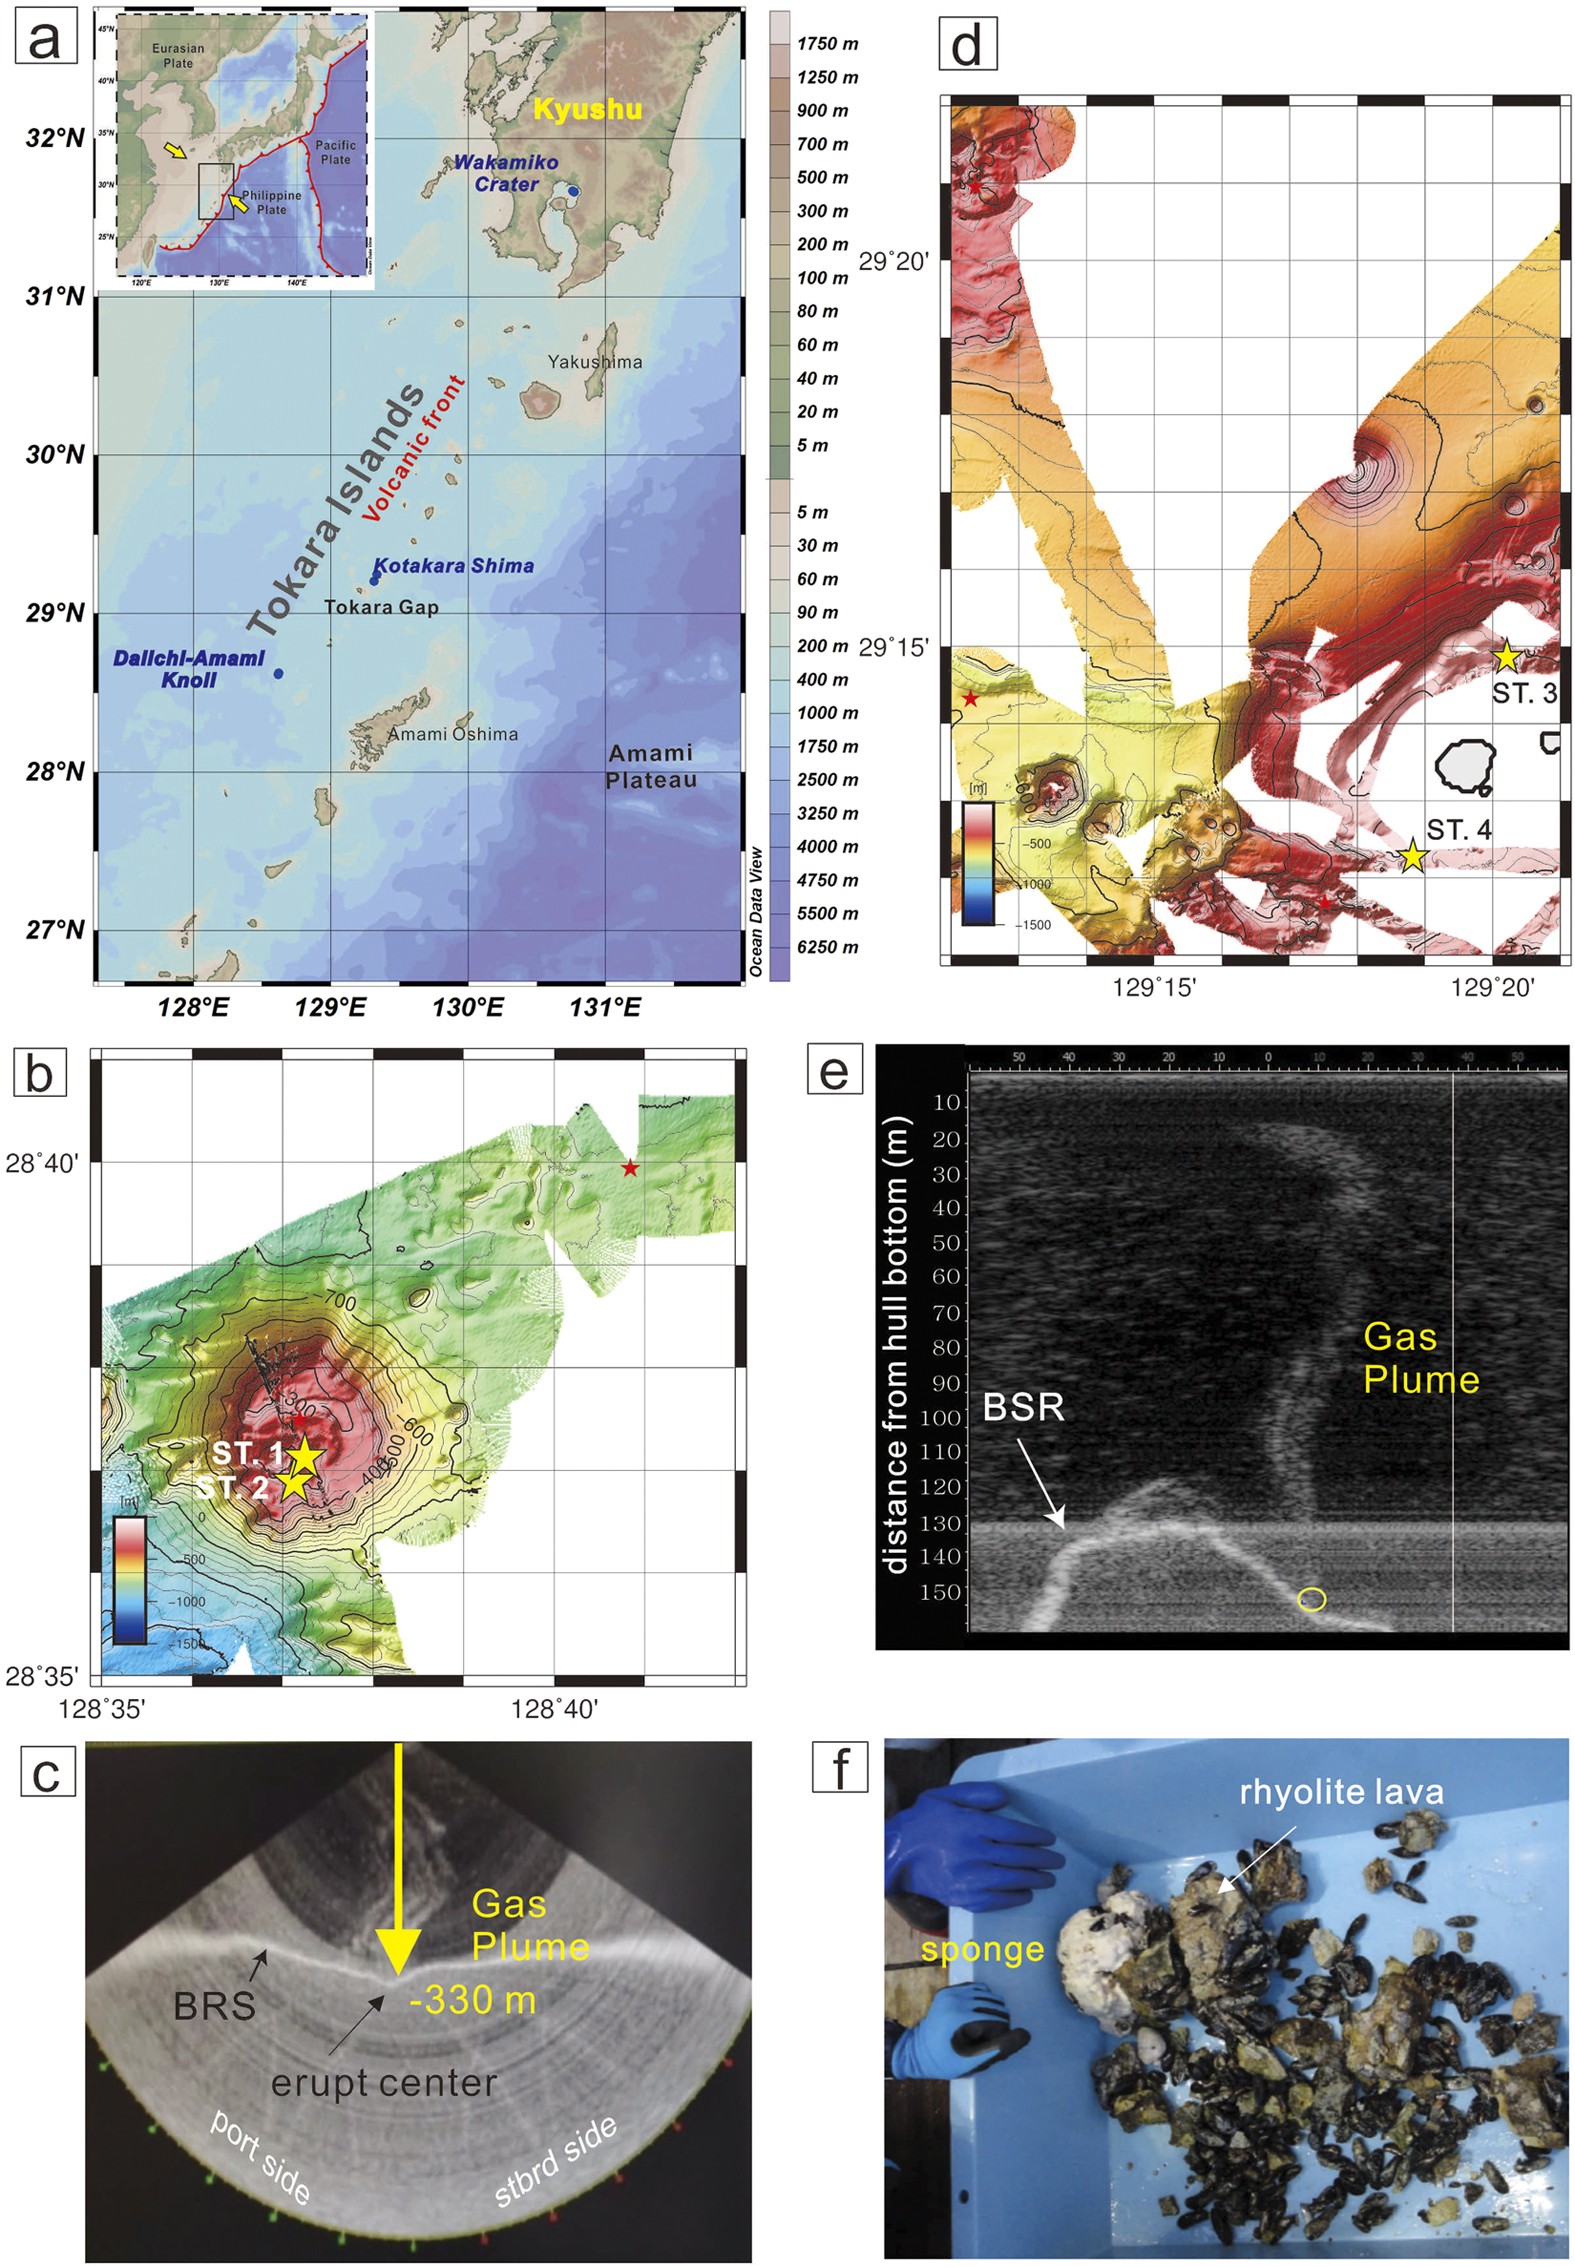 Helium and methane sources and fluxes of shallow submarine hydrothermal  plumes near the Tokara Islands, Southern Japan | Scientific Reports